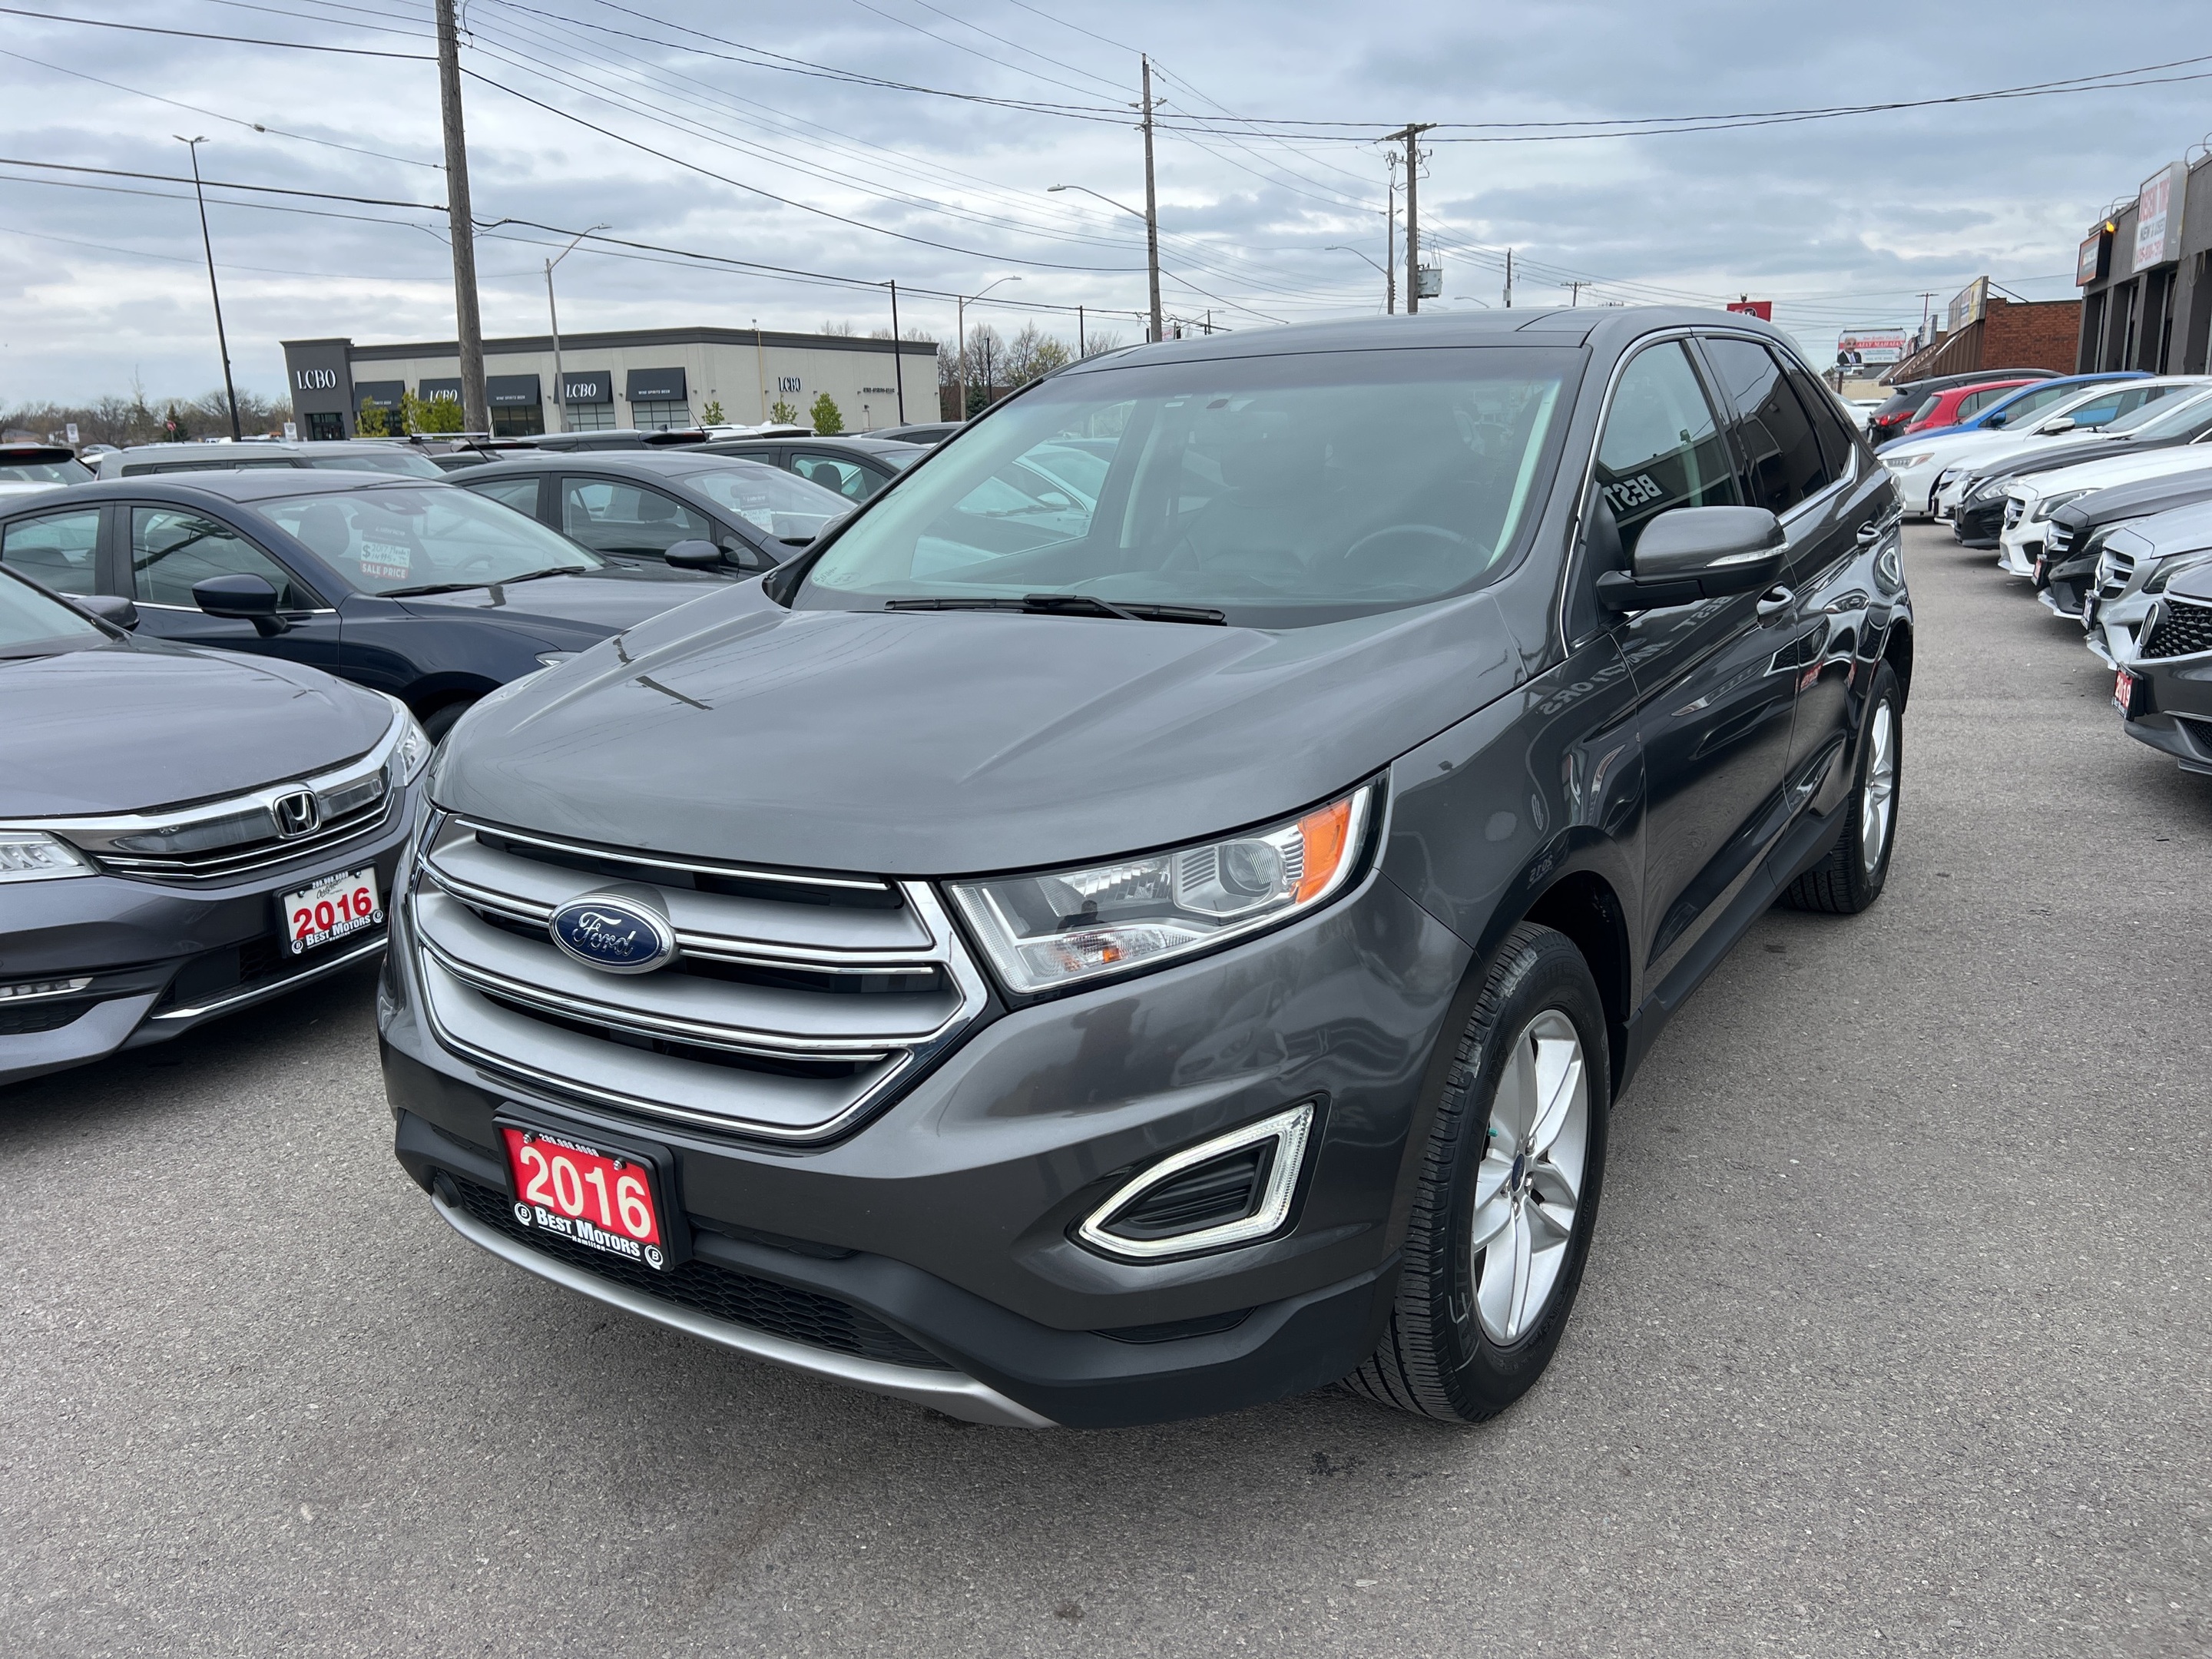 2016 Ford Edge SEL AWD Panoramic Sunroof Leather seats